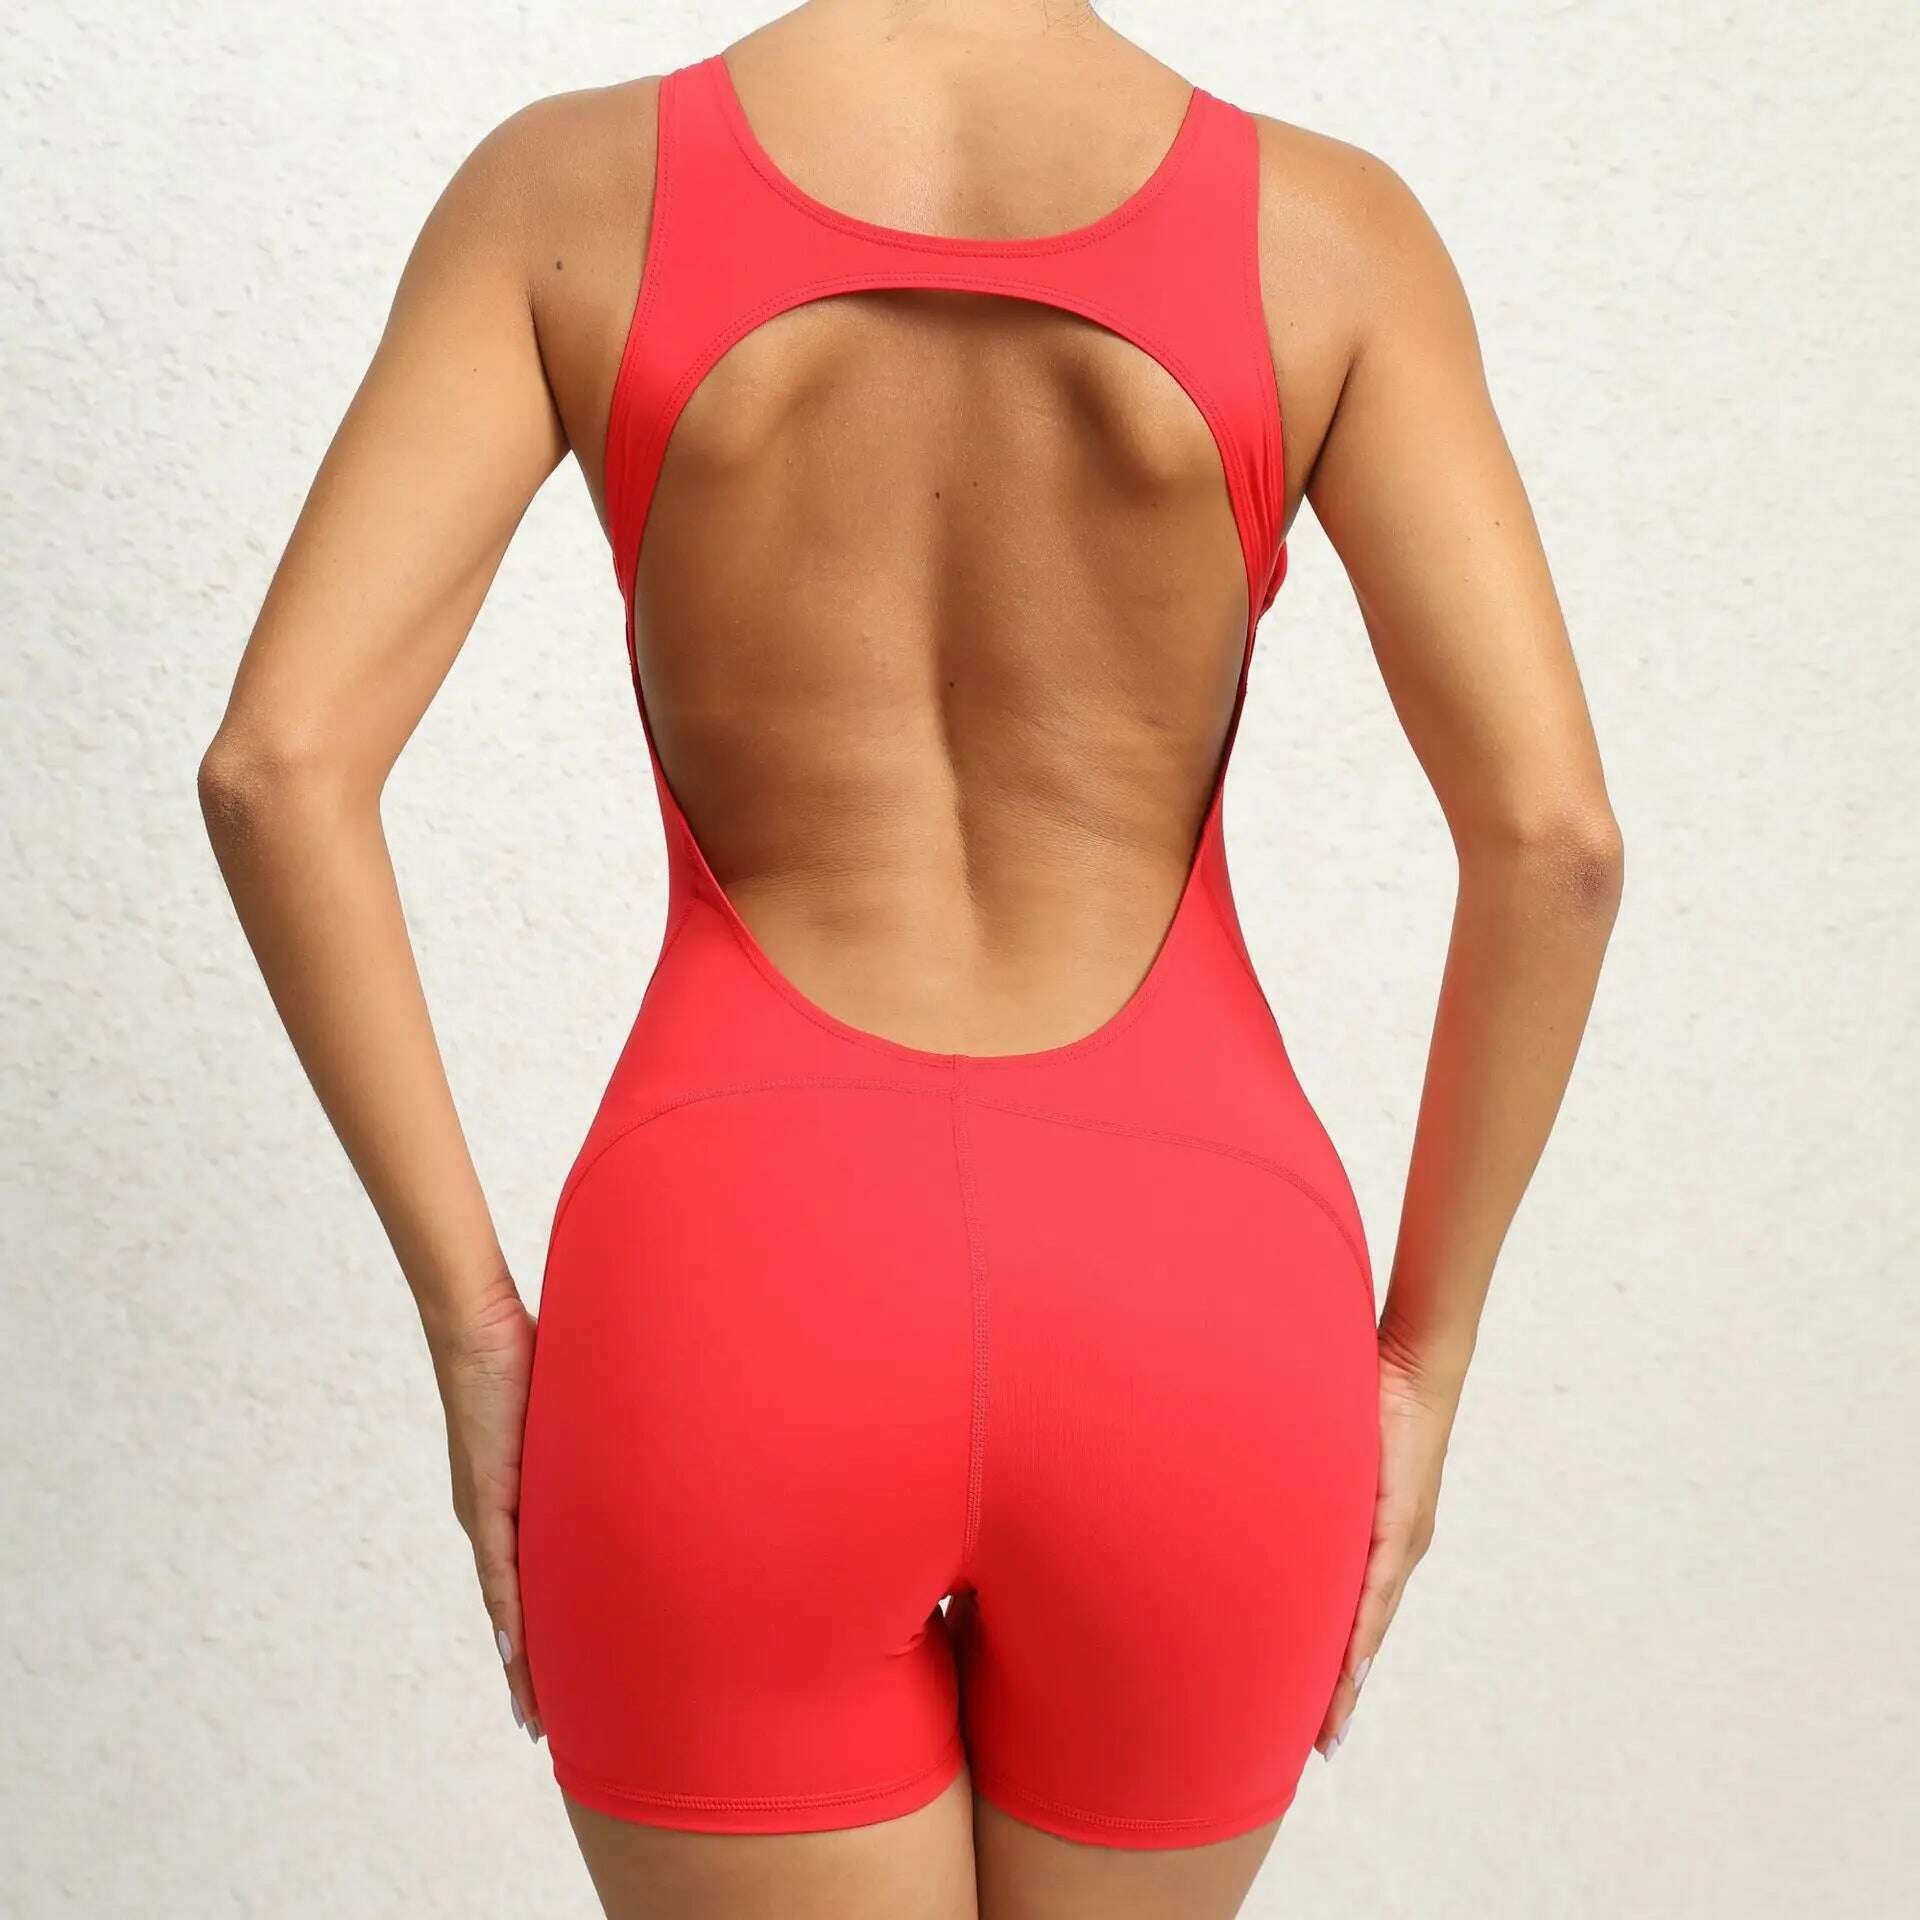 KIMLUD, Sporty Jumpsuit Women Gym Yoga Clothing Lycra Short Fitness Overalls Backless Workout Clothes for Women Sport Set Activewear New, Red / L, KIMLUD Womens Clothes